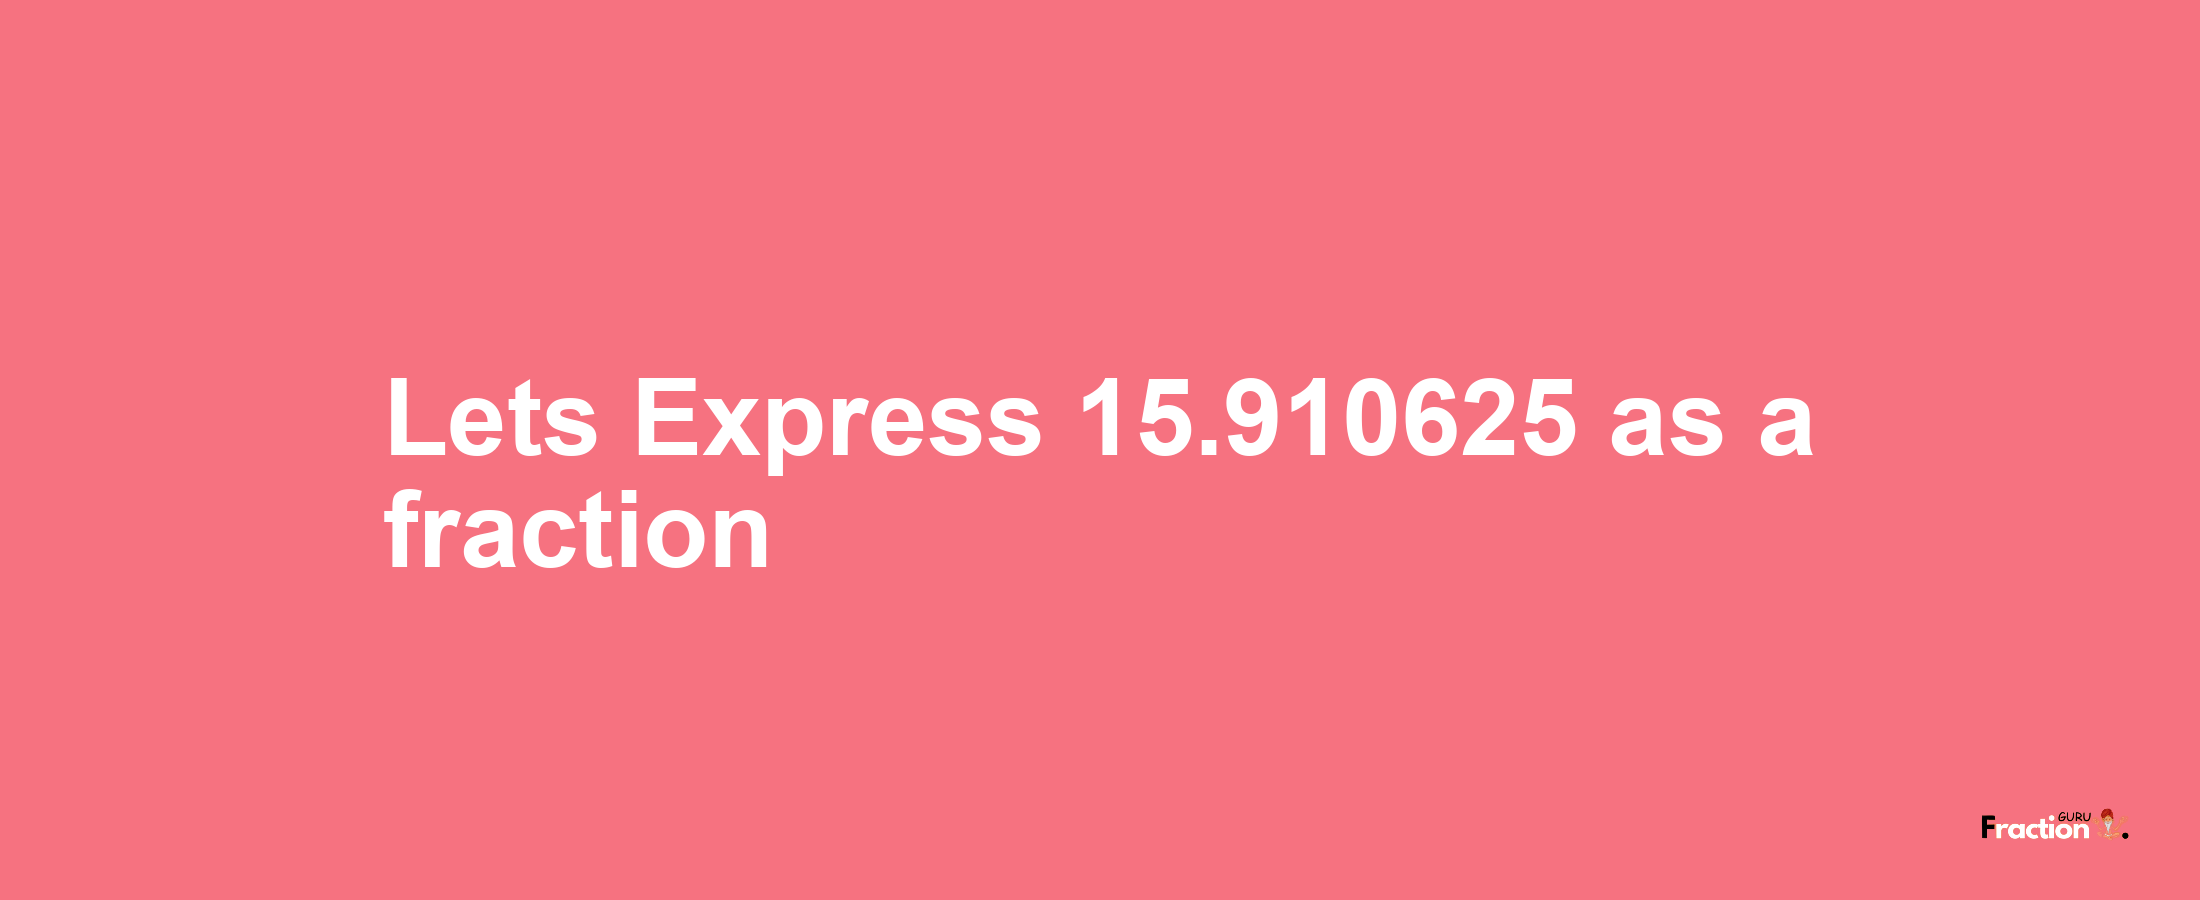 Lets Express 15.910625 as afraction